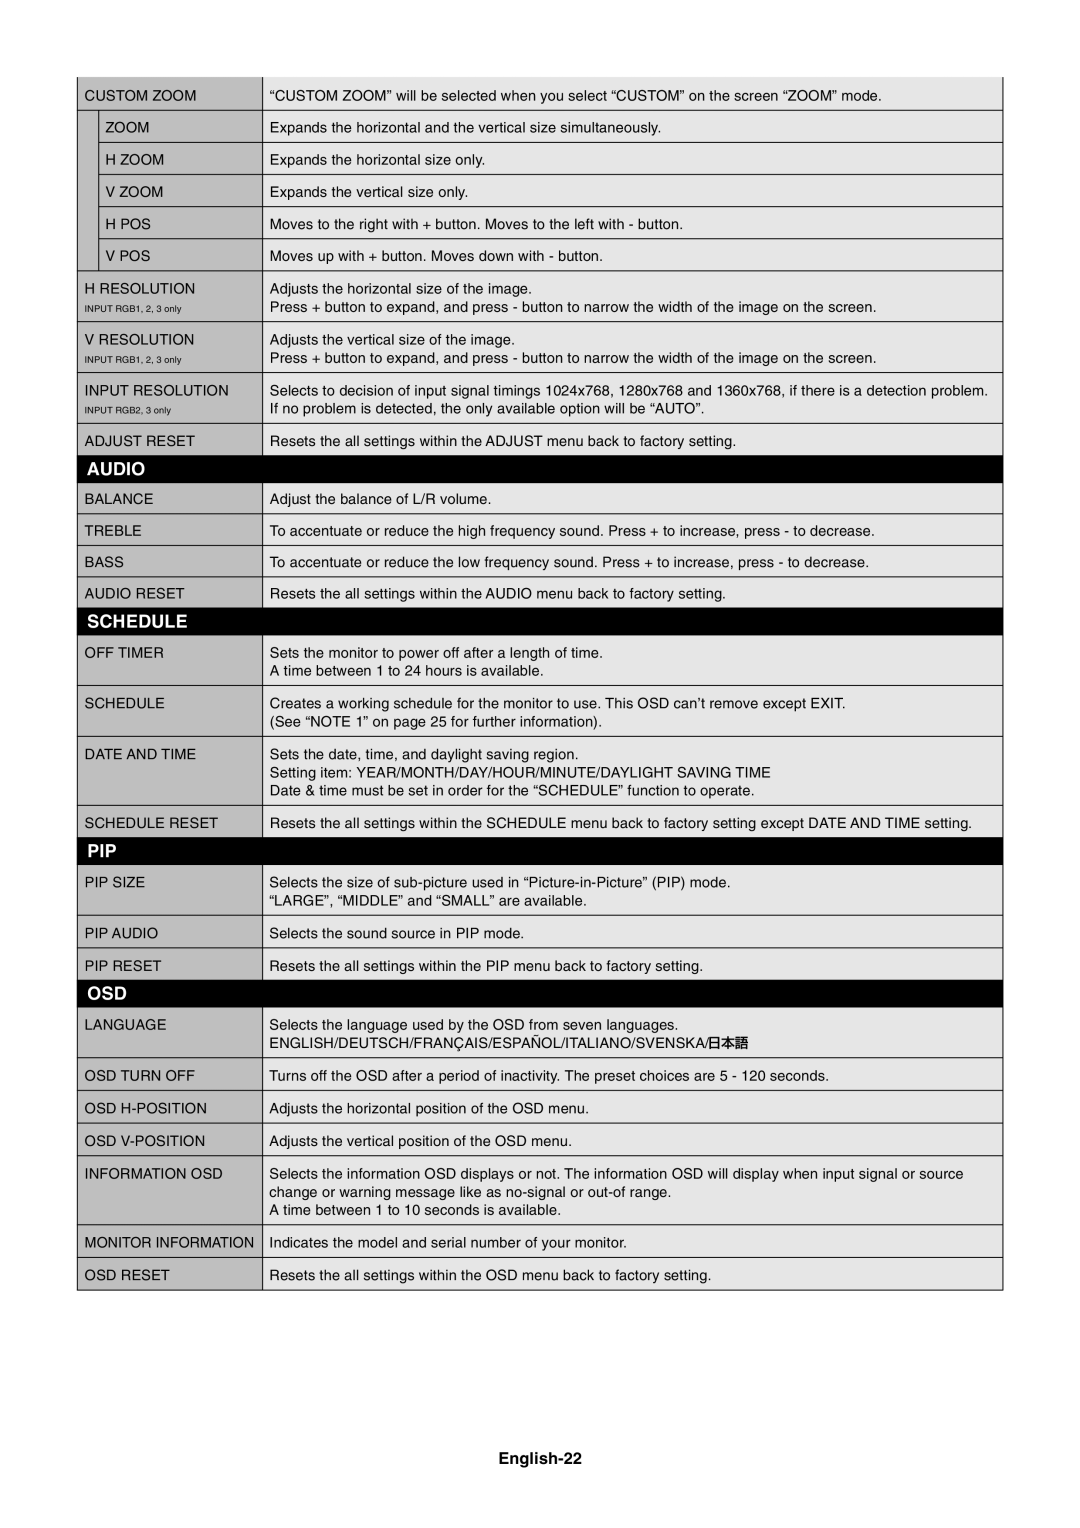 NEC LCD4615 user manual Audio, Schedule, English-22 